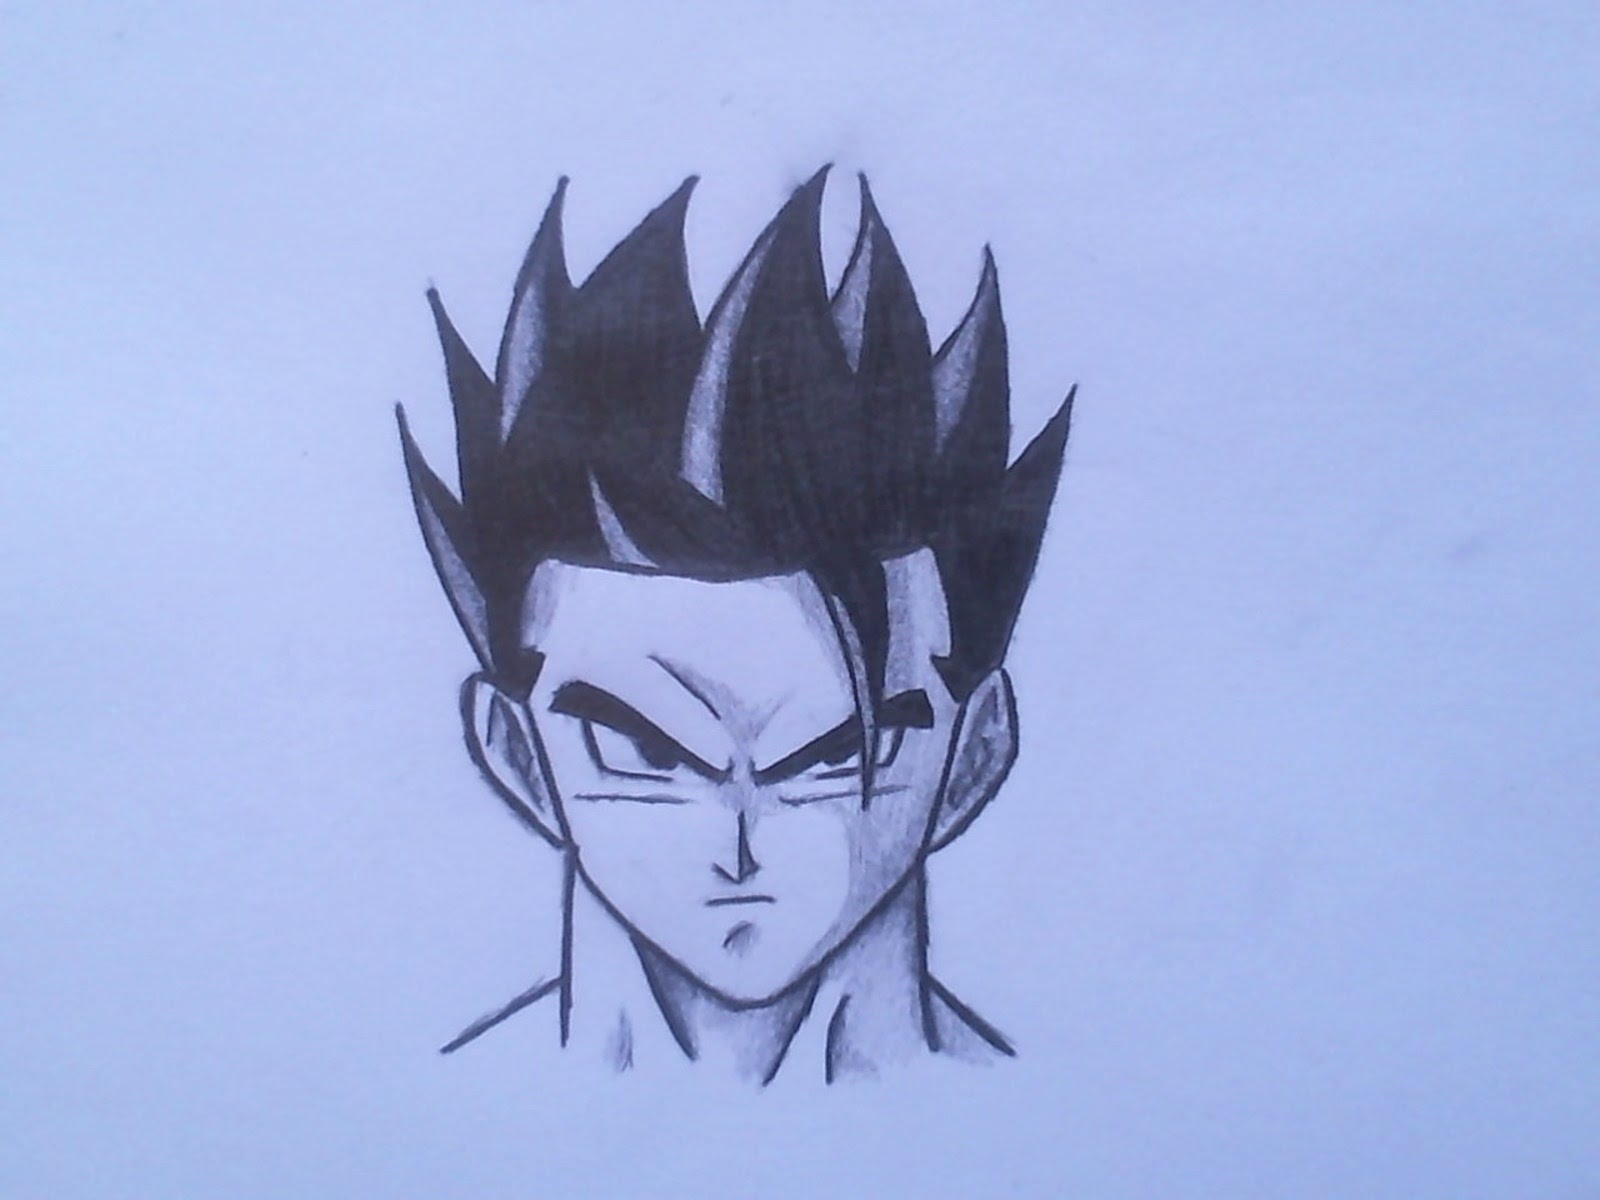 How To Draw Adult Gohan - Draw Adult Gohan - HD Wallpaper 